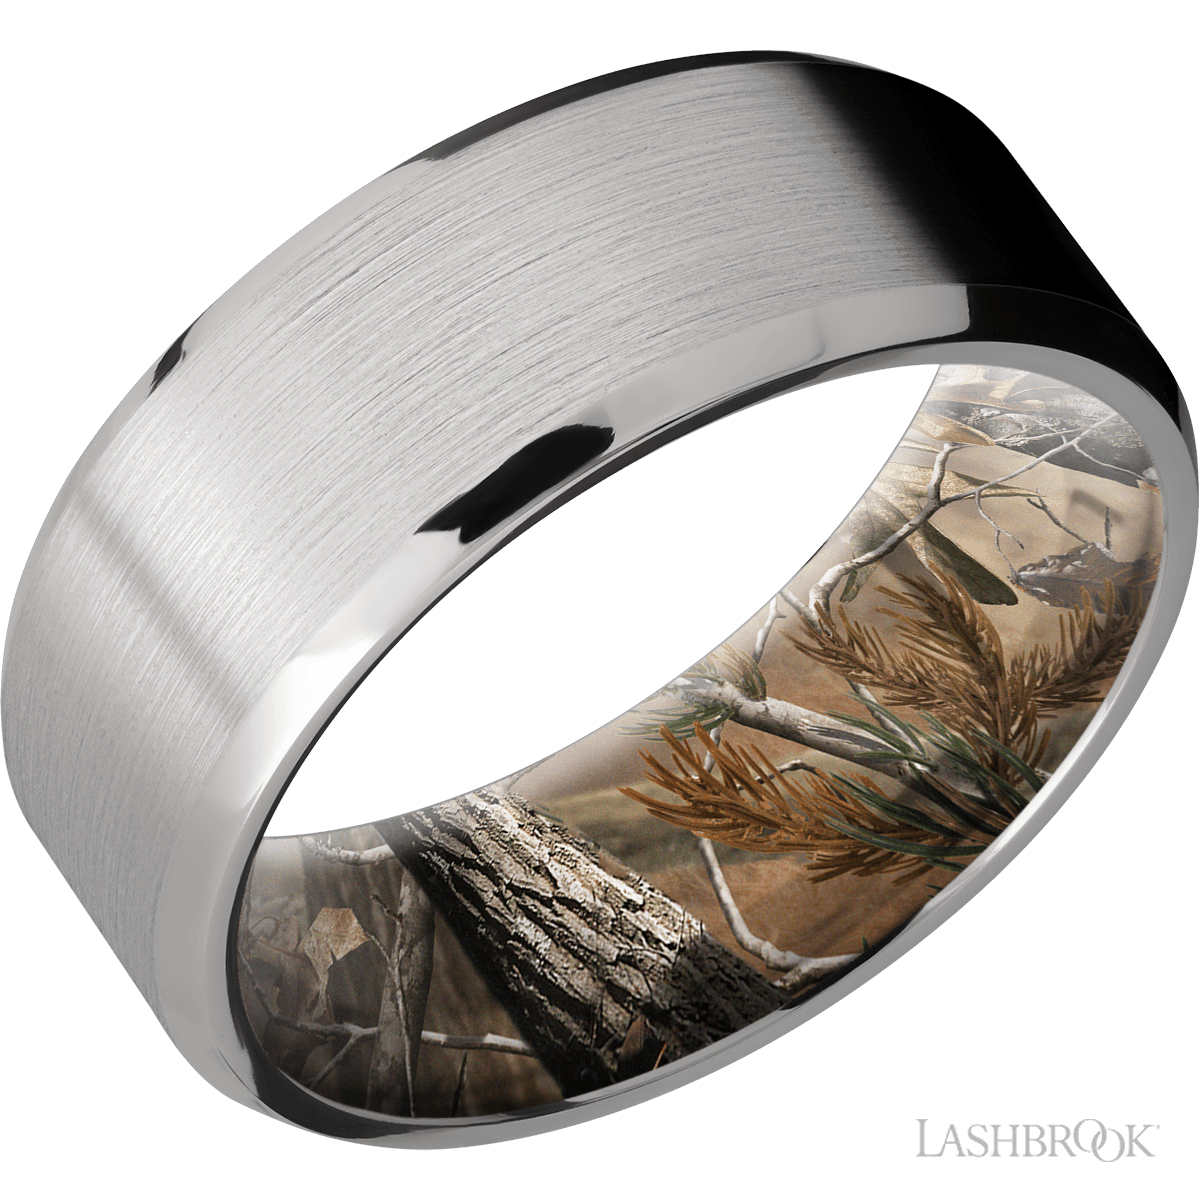 Titanium 8mm Flat Band With Polished Beveled Edges And A Realtree Camo Sleeve